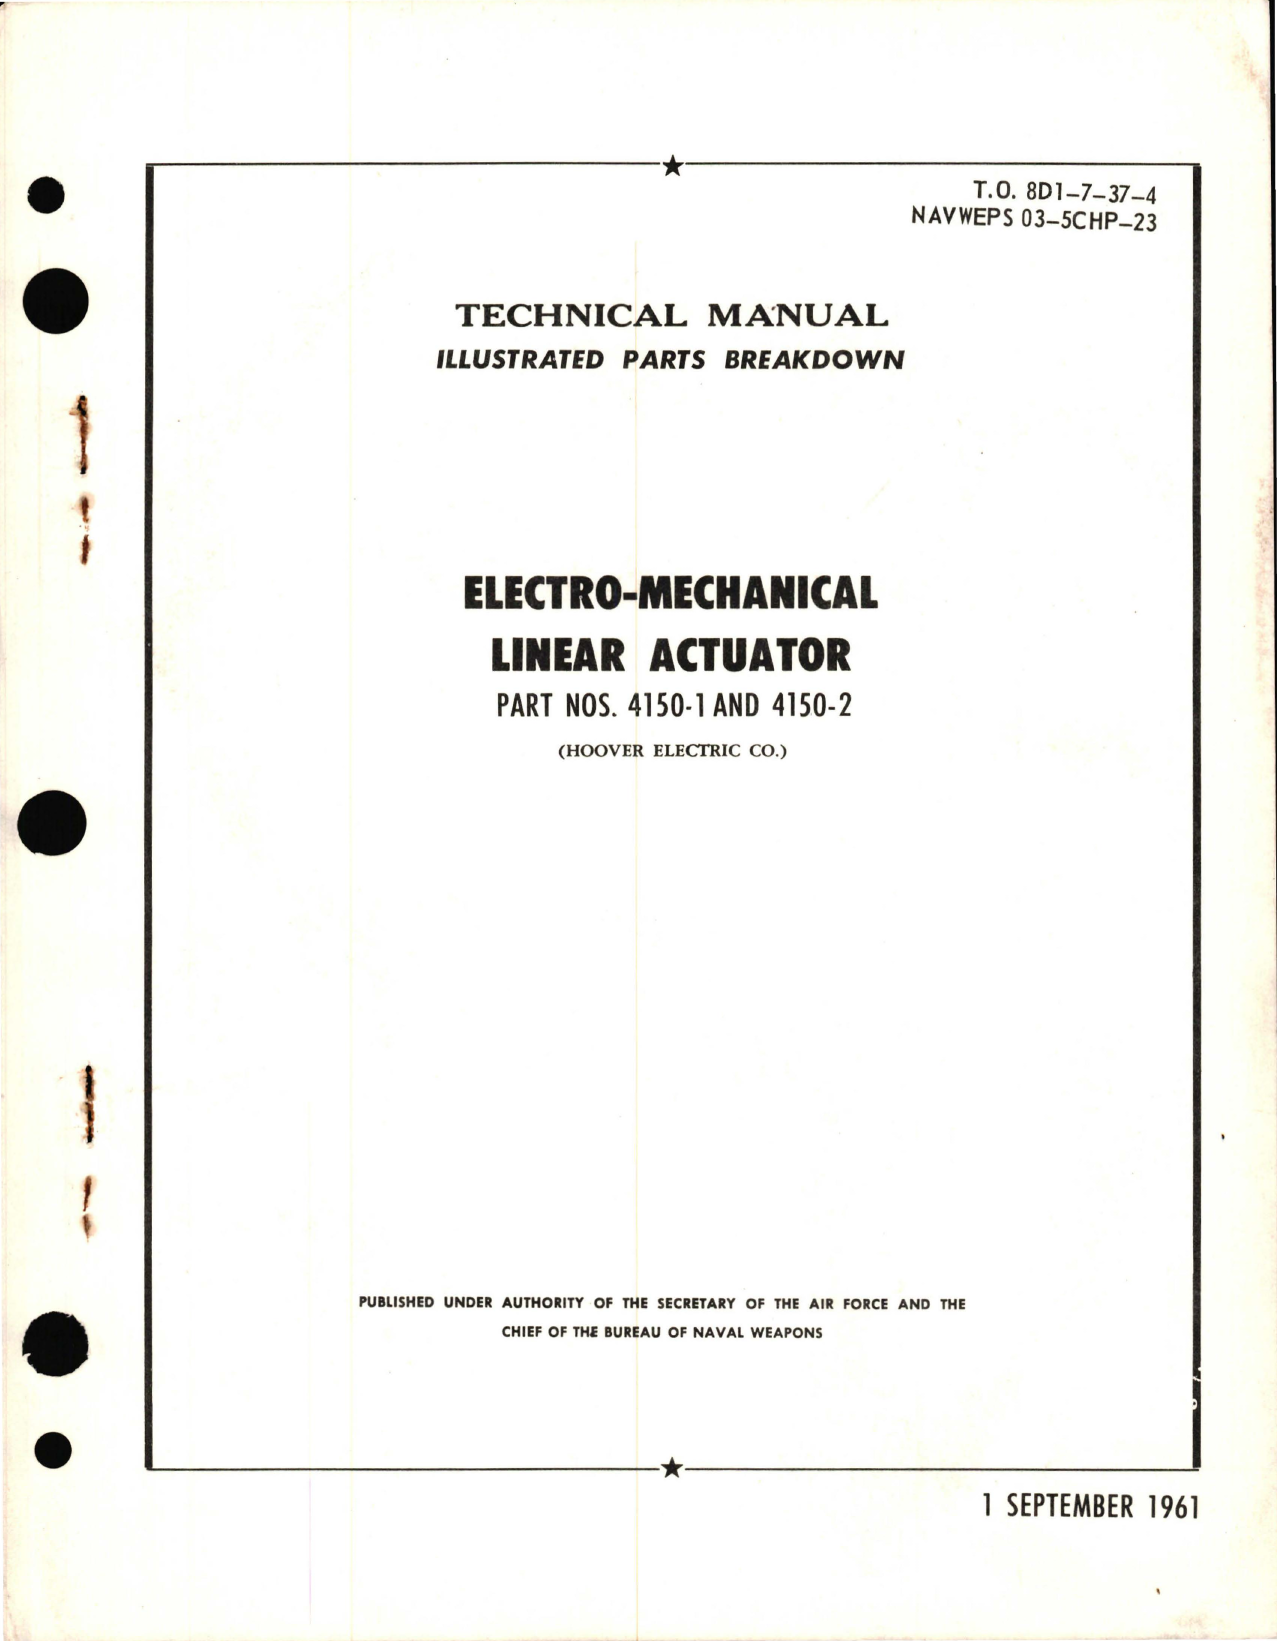 Sample page 1 from AirCorps Library document: Illustrated Parts Breakdown for Electro-Mechanical Linear Actuator, Part No 4150-1 and 4150-2